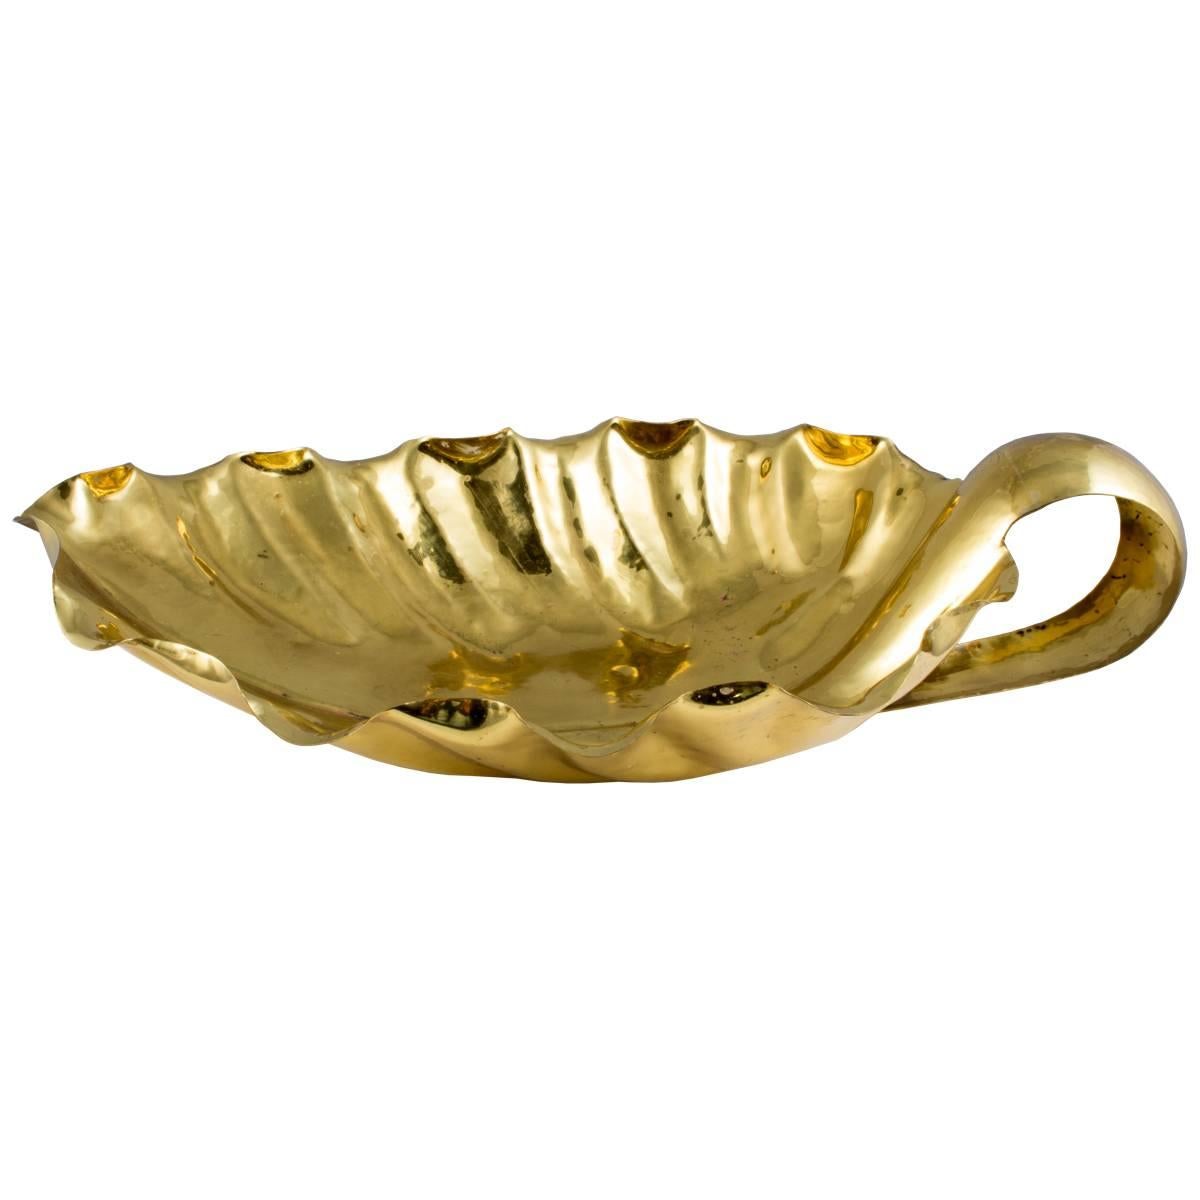 One of our favorite finds on our recent trip to Milan is this gorgeous pair of mid-century brass leaf bowls from Italian artist Tomasso Barbi and each one is signed! Beautiful displayed together on a surface, or on a bookshelf to add a touch of